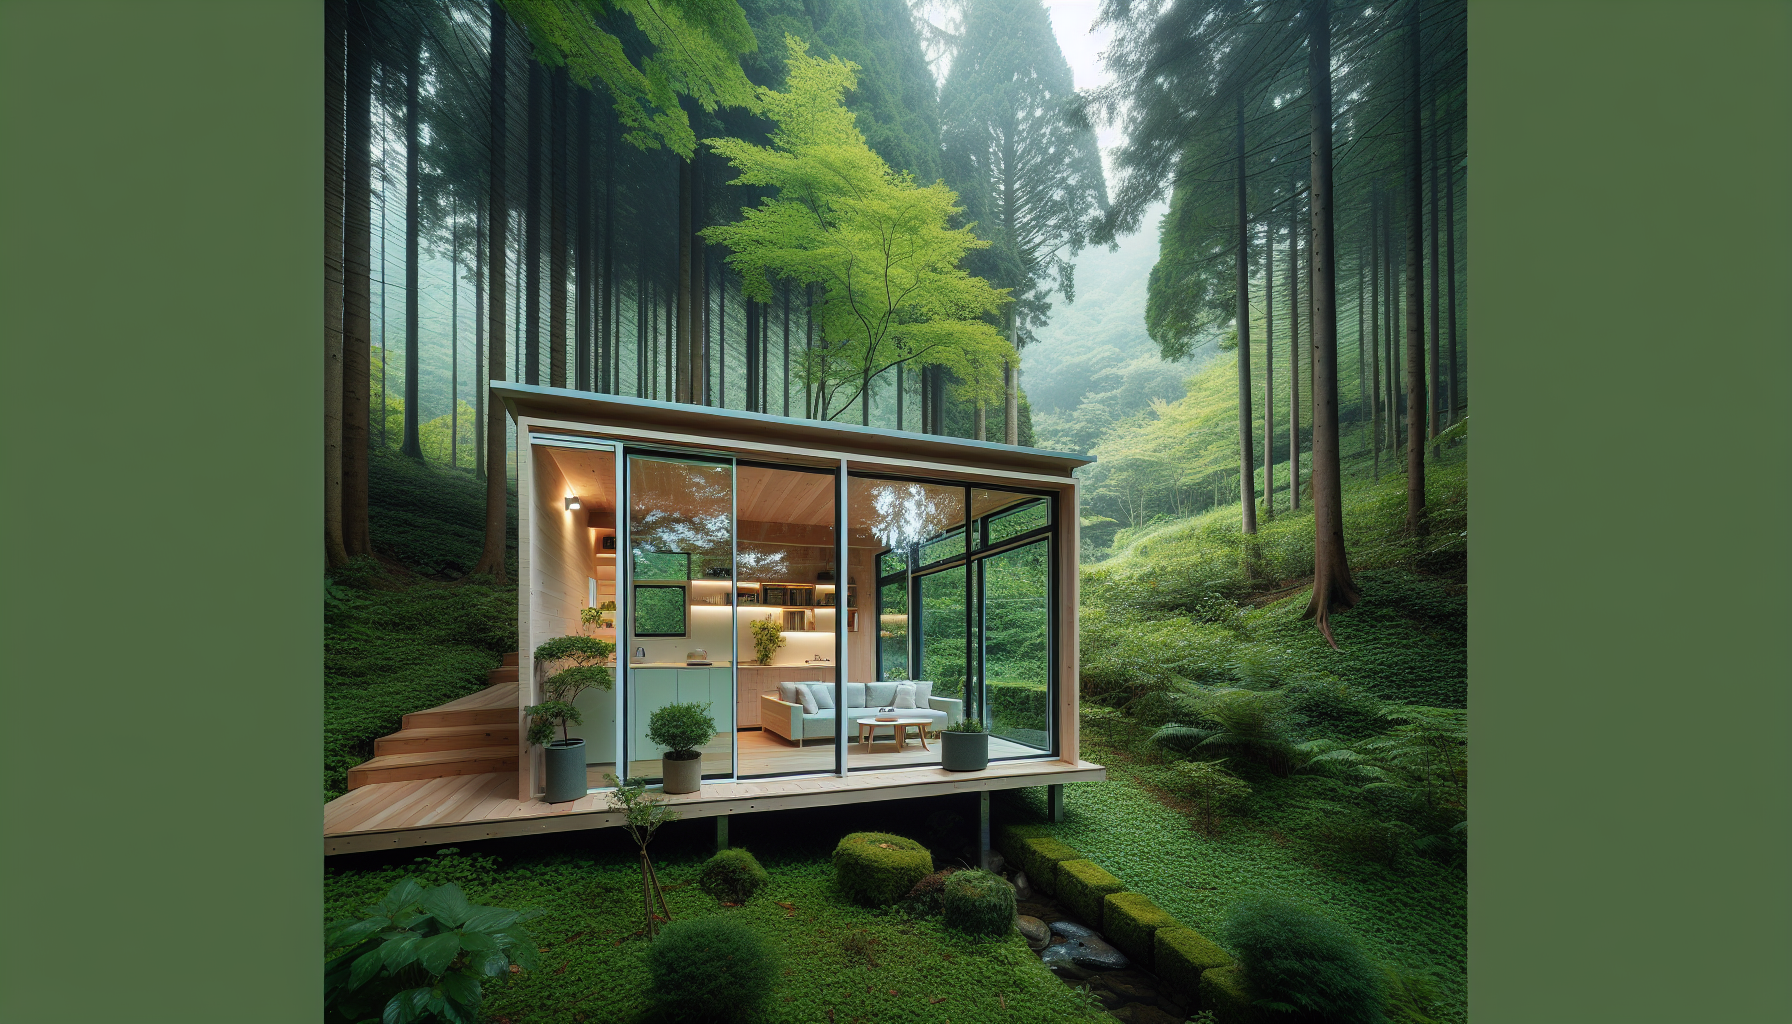 Tiny house design featuring floor-to-ceiling windows for natural light